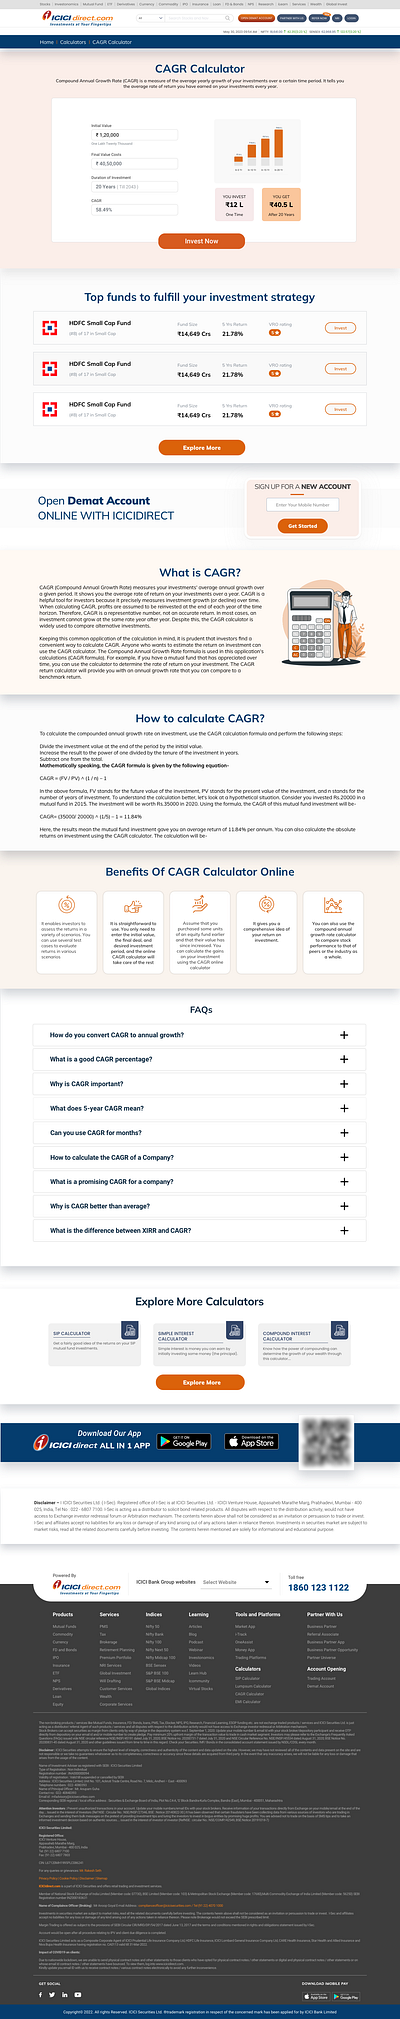 CAGR Calculator Page sk sketch user experience user interface